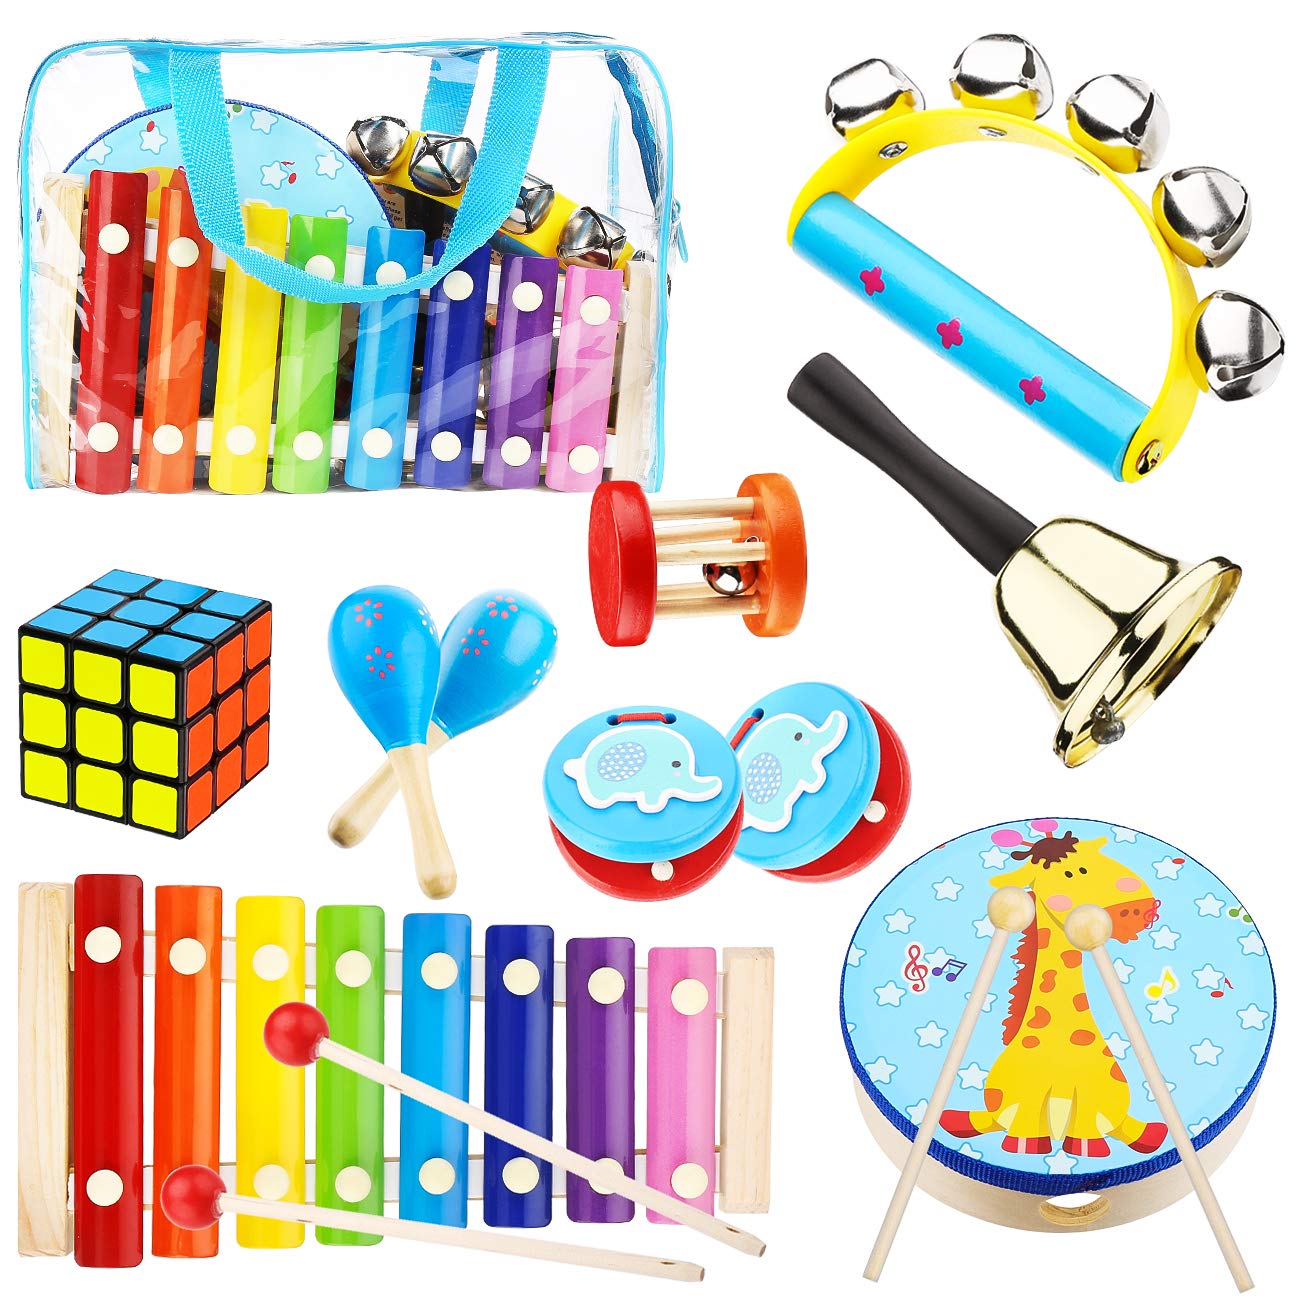 Kids Musical Percussion Instruments Set Wooden Musical Toys For Toddlers Babies Rhythm Instruments 1 2 3 4 5 6 Years Old Children Educational Music Gift